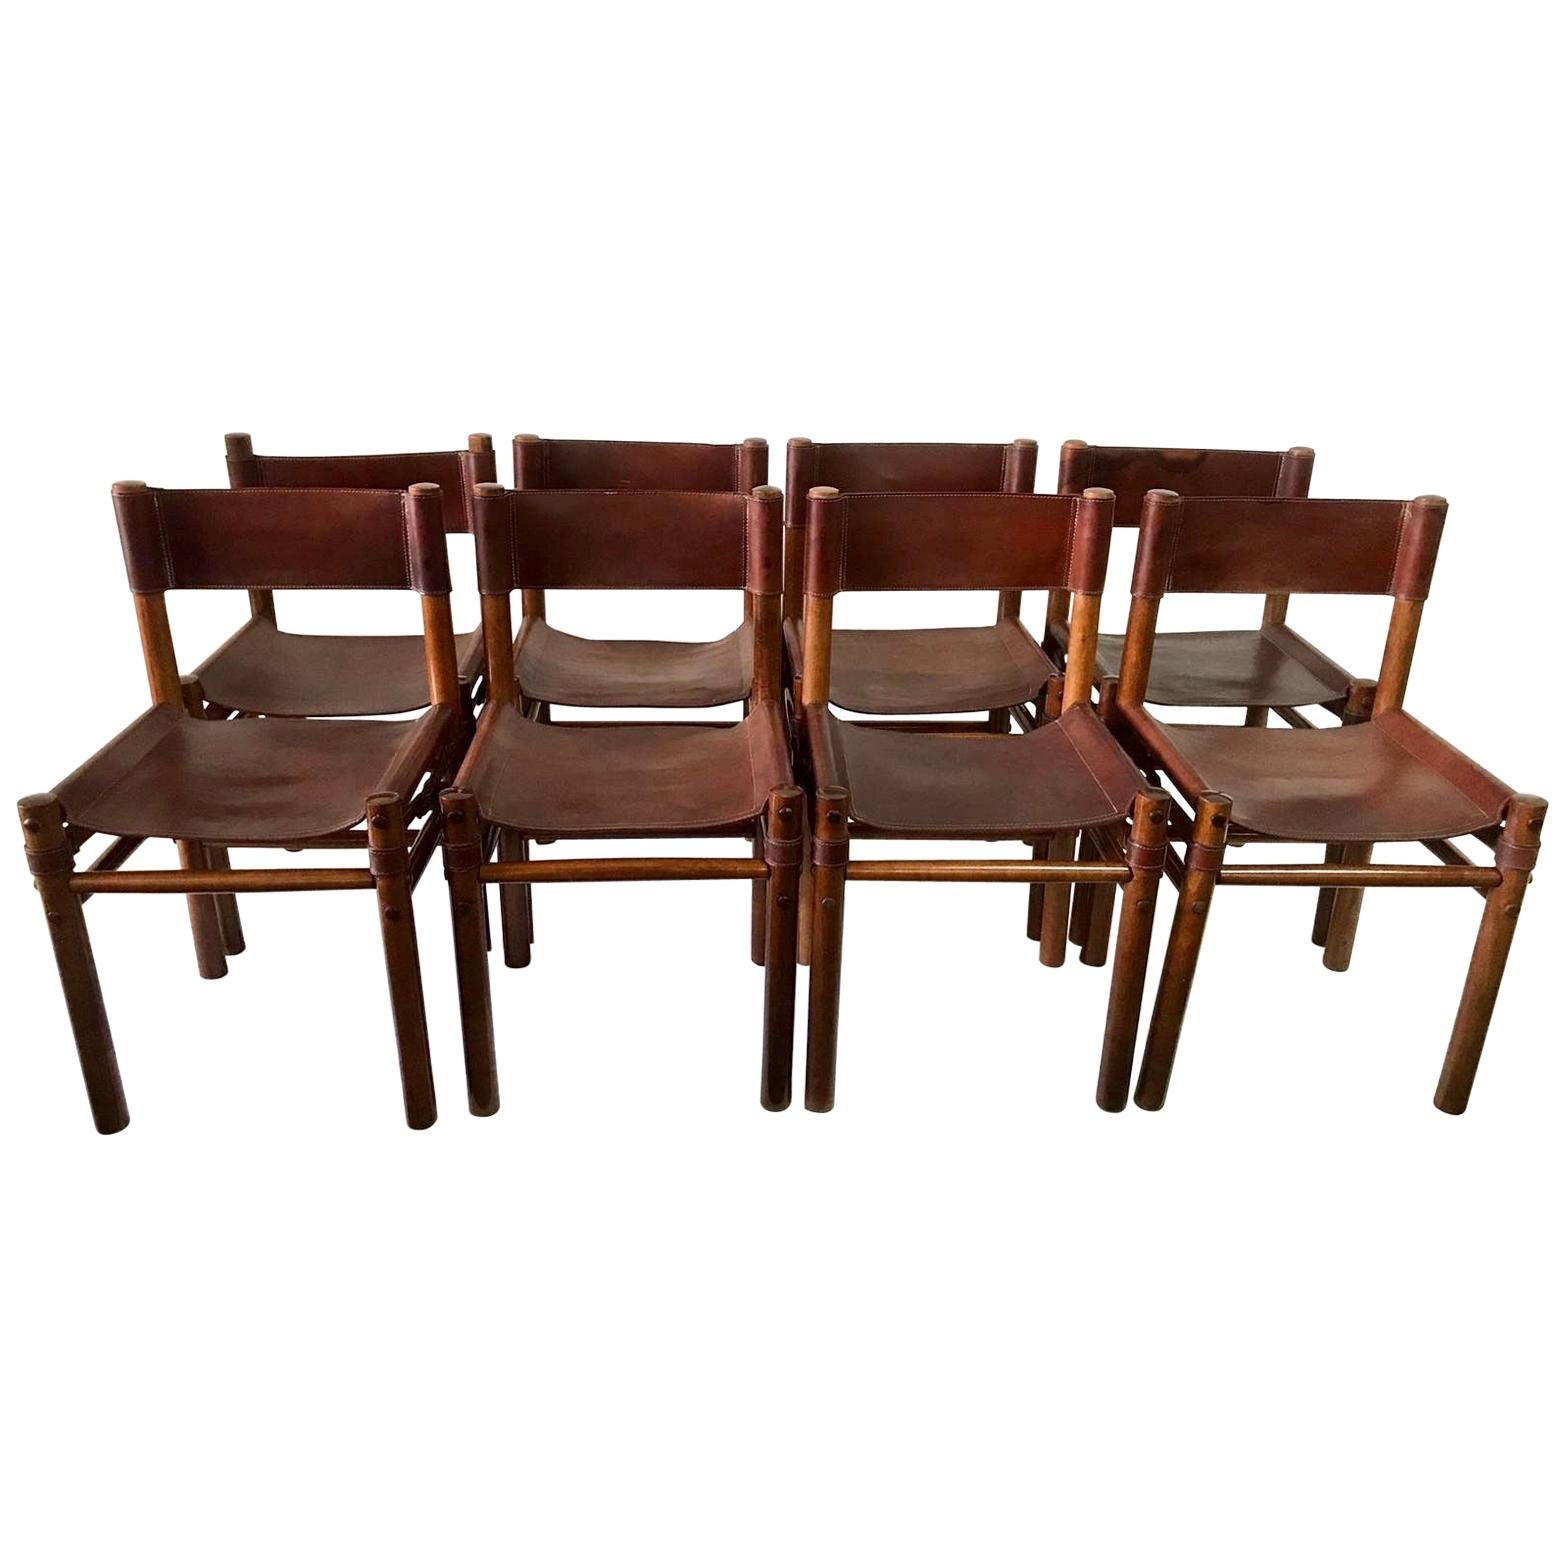 Hand Stitched Leather Estancia Chairs, Set of 8